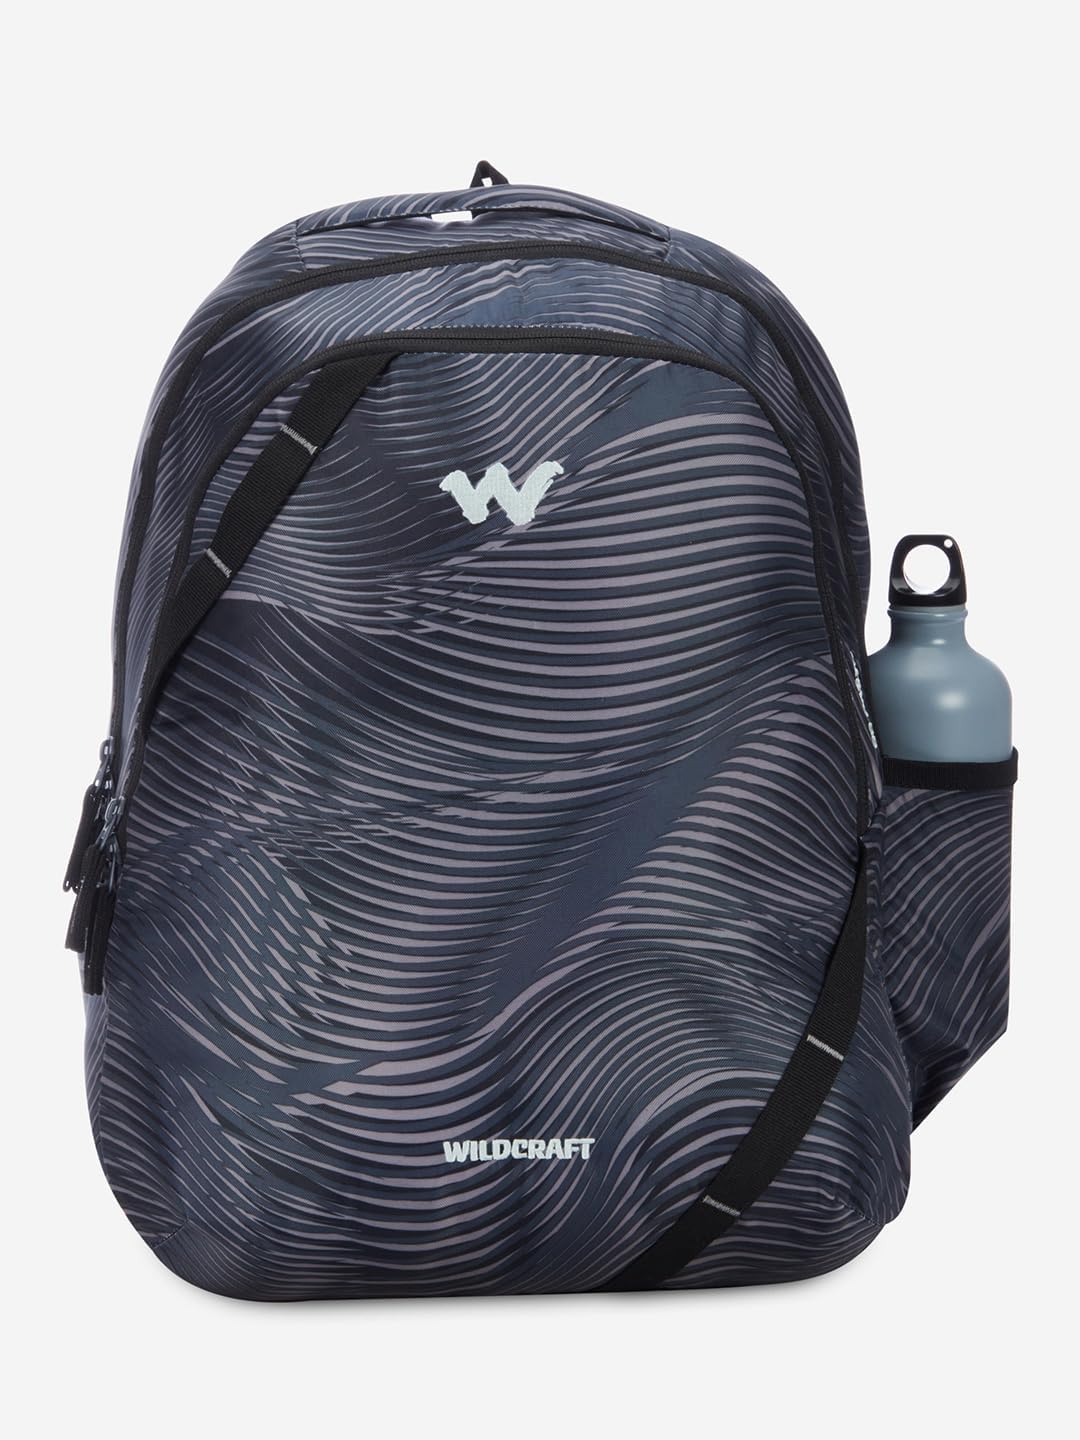 Wildcraft Large Backpack Bravo RC Contour Black 35 L |  Bags & Sleeves |  Halabh.com